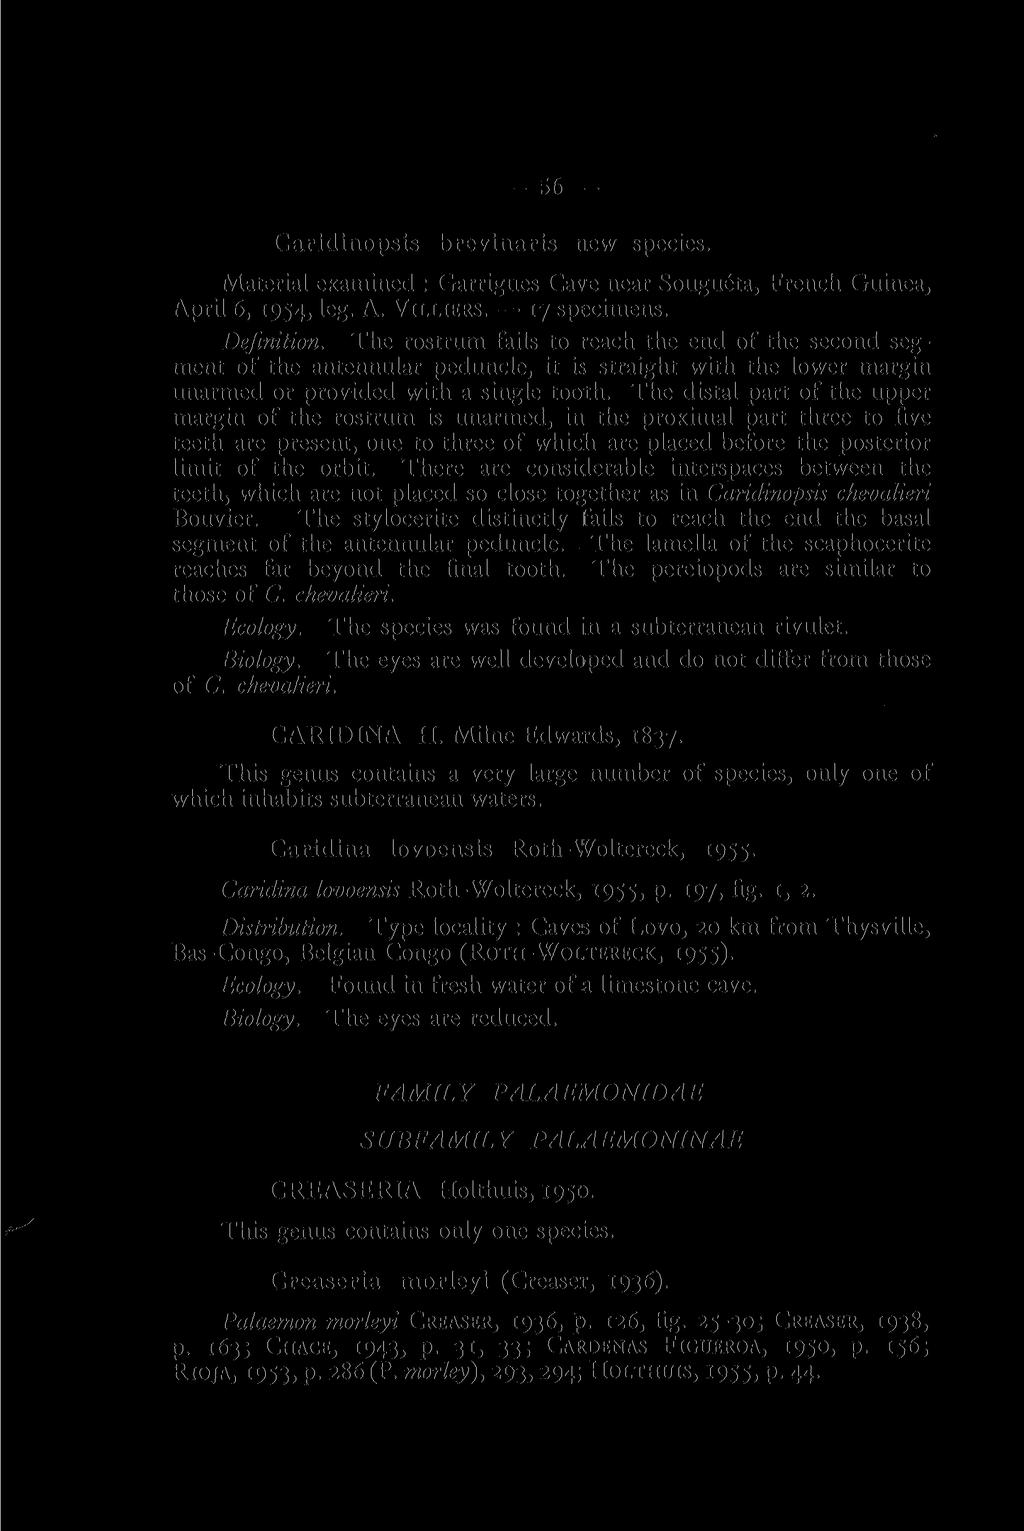 Caridinopsis brevinaris new species. Material examined : Garrigues Cave near Sougueta, French Guinea, April 6,1954, L E - A. VILLIERS. 17 specimens. Definition.